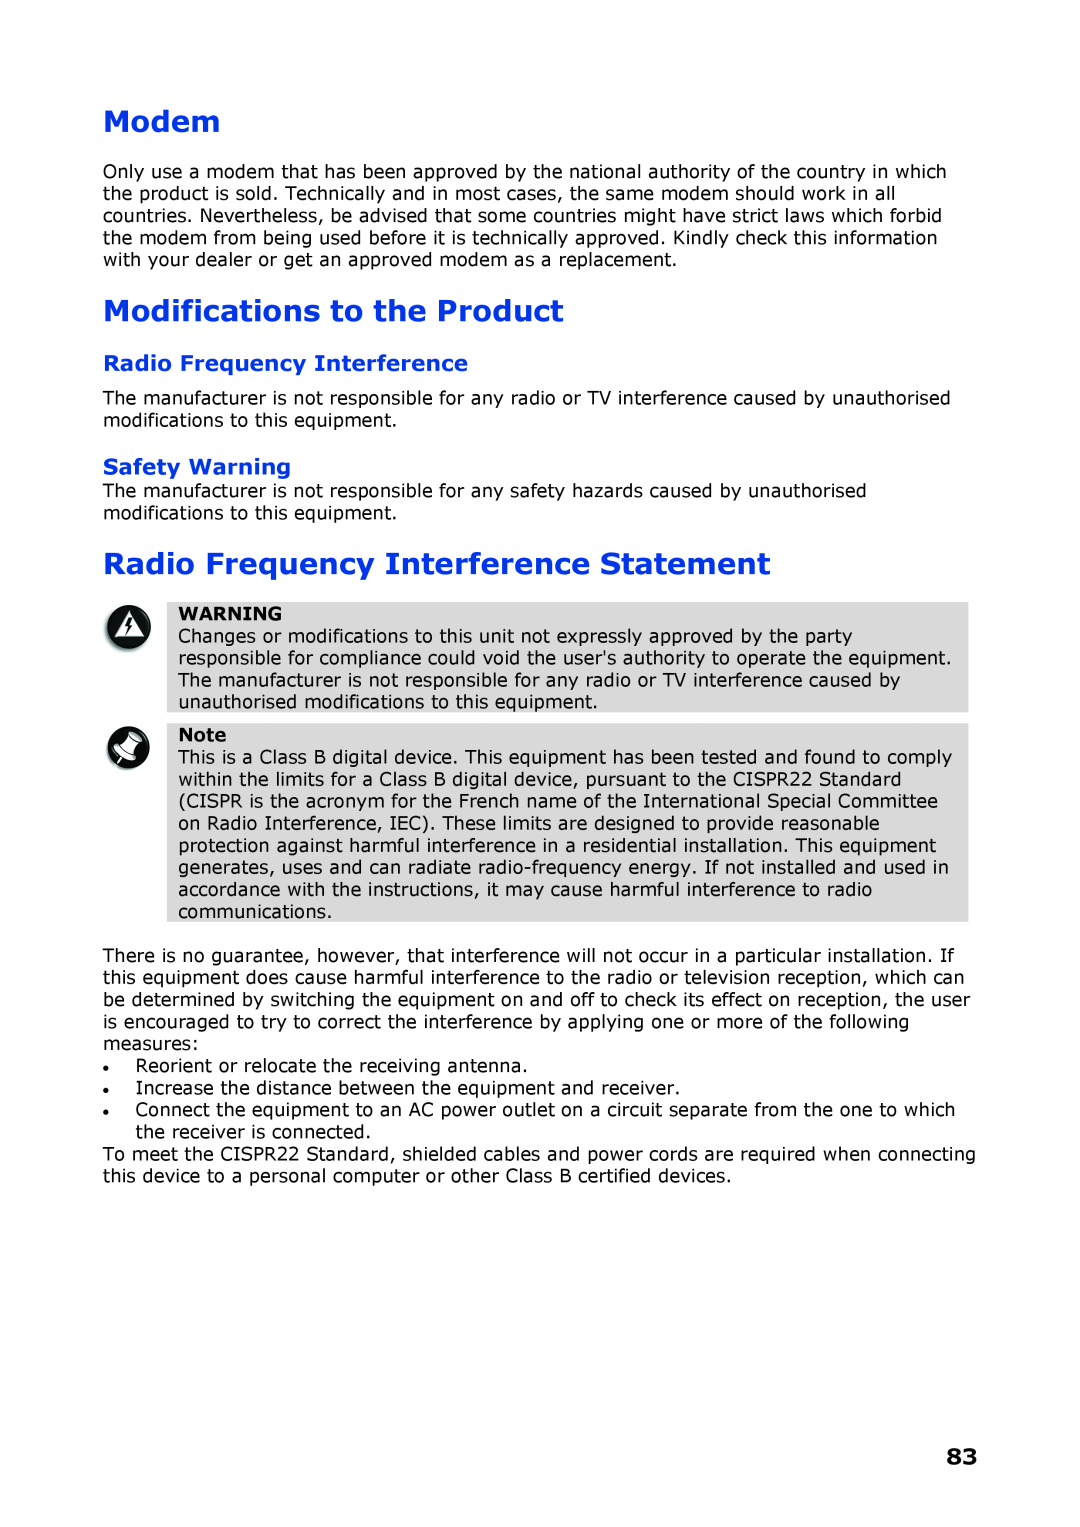 NEC P8510 manual Modifications to the Product, Radio Frequency Interference Statement, Safety Warning, Modem 